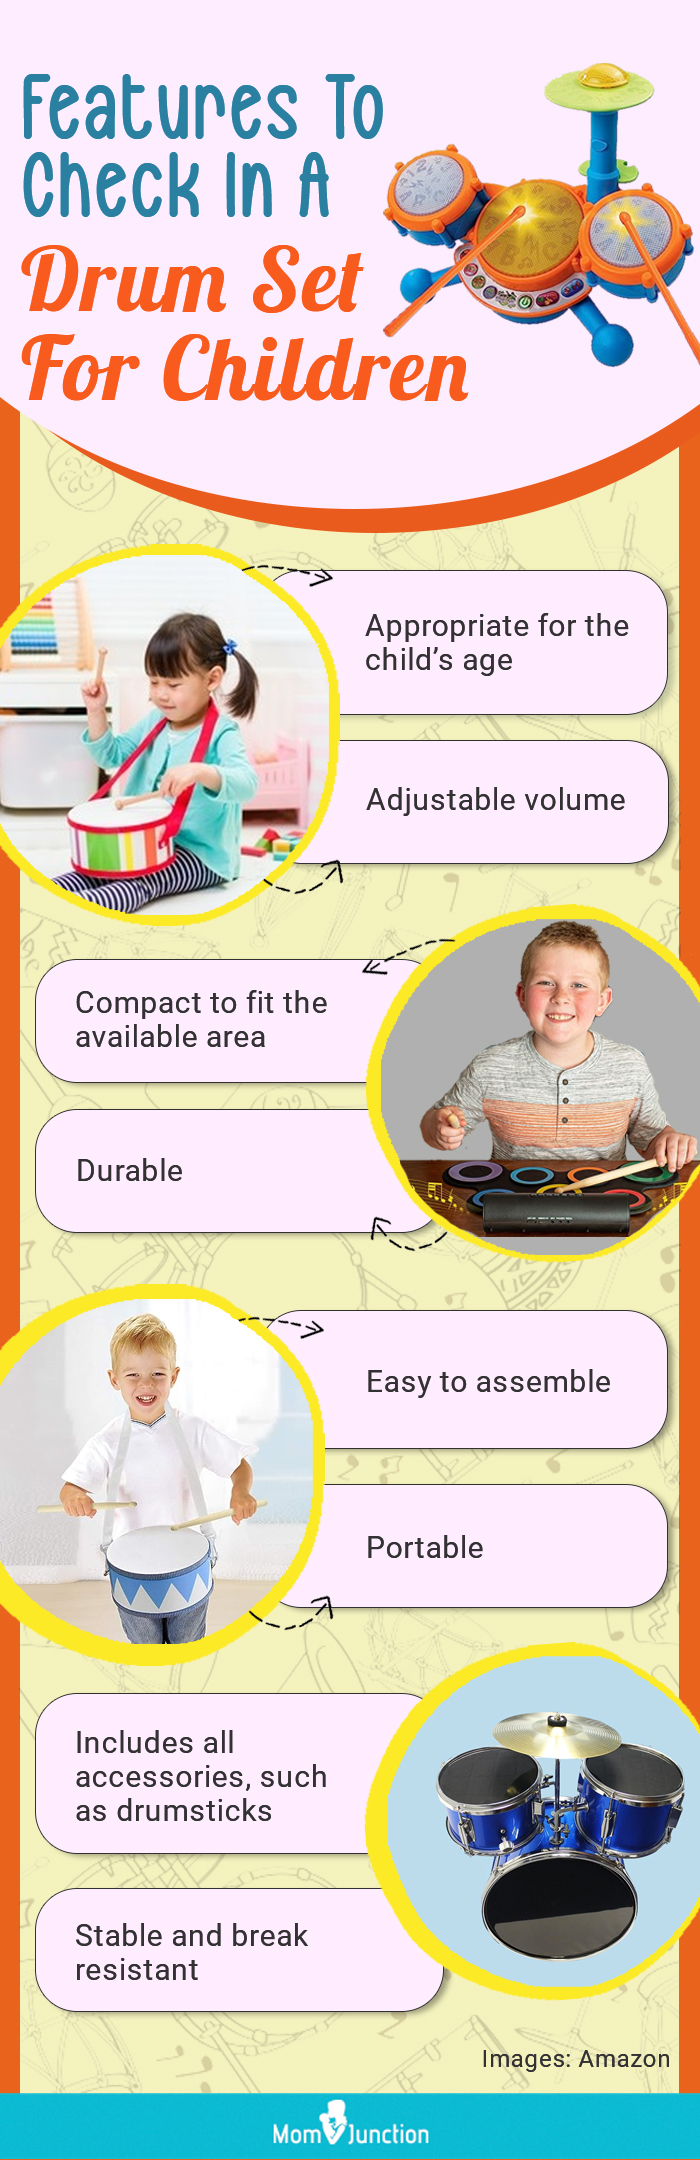 Features To Check In A Drum Set For Children (infographic)